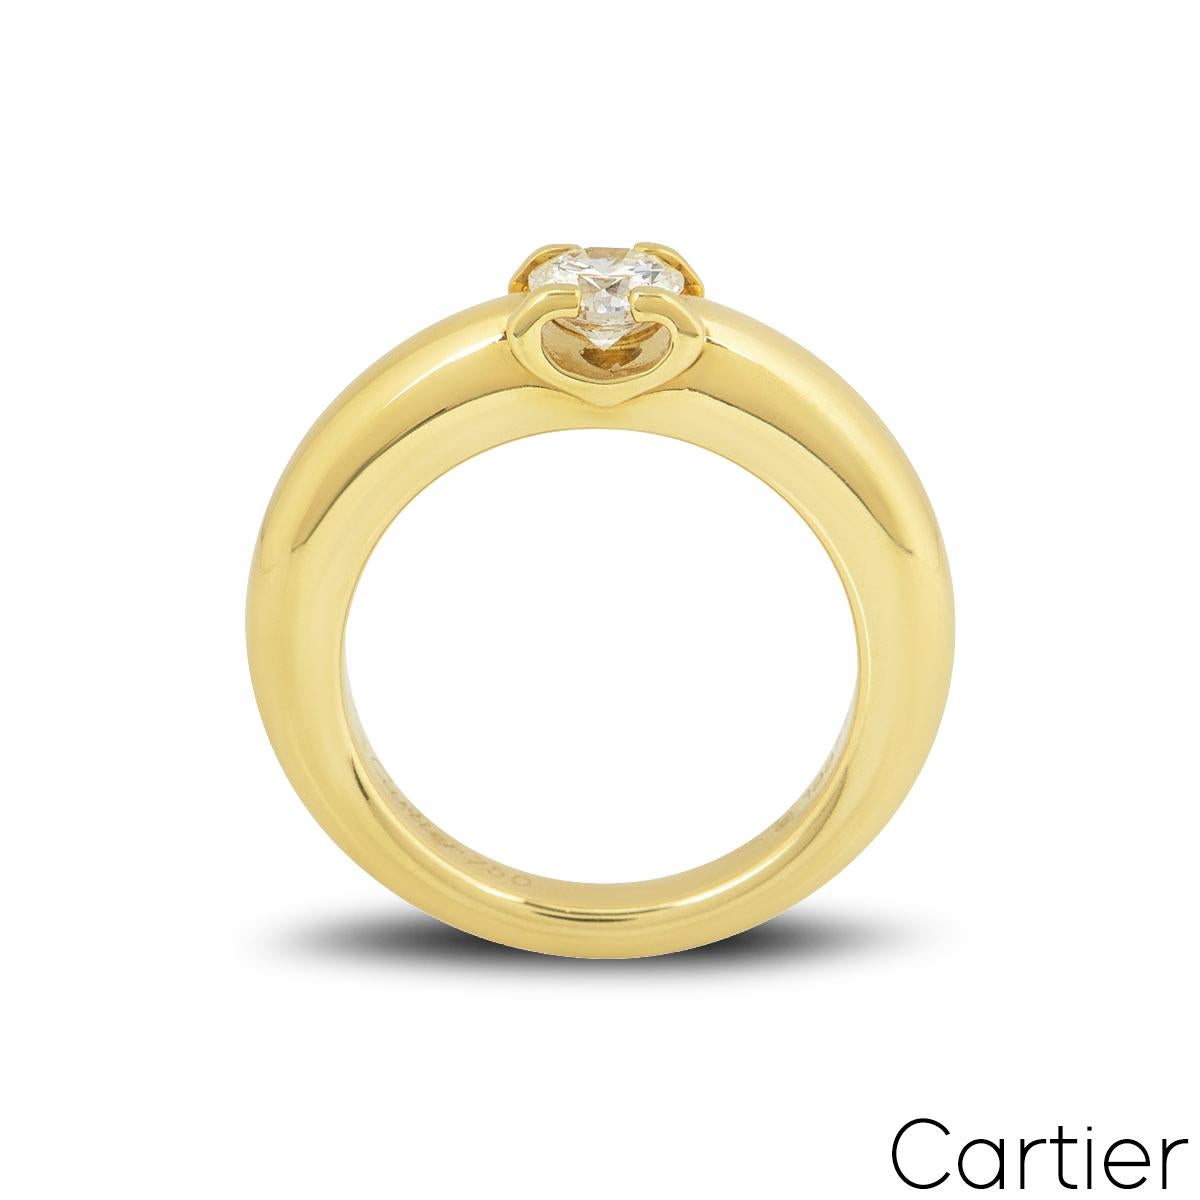 A classic 18k white gold diamond ring by Cartier from the C De Cartier collection. The ring is set to the centre in a four claw mount with a round brilliant cut diamond weighing 0.40ct, G colour and VS1 clarity. The ring measures 4mm wide, is